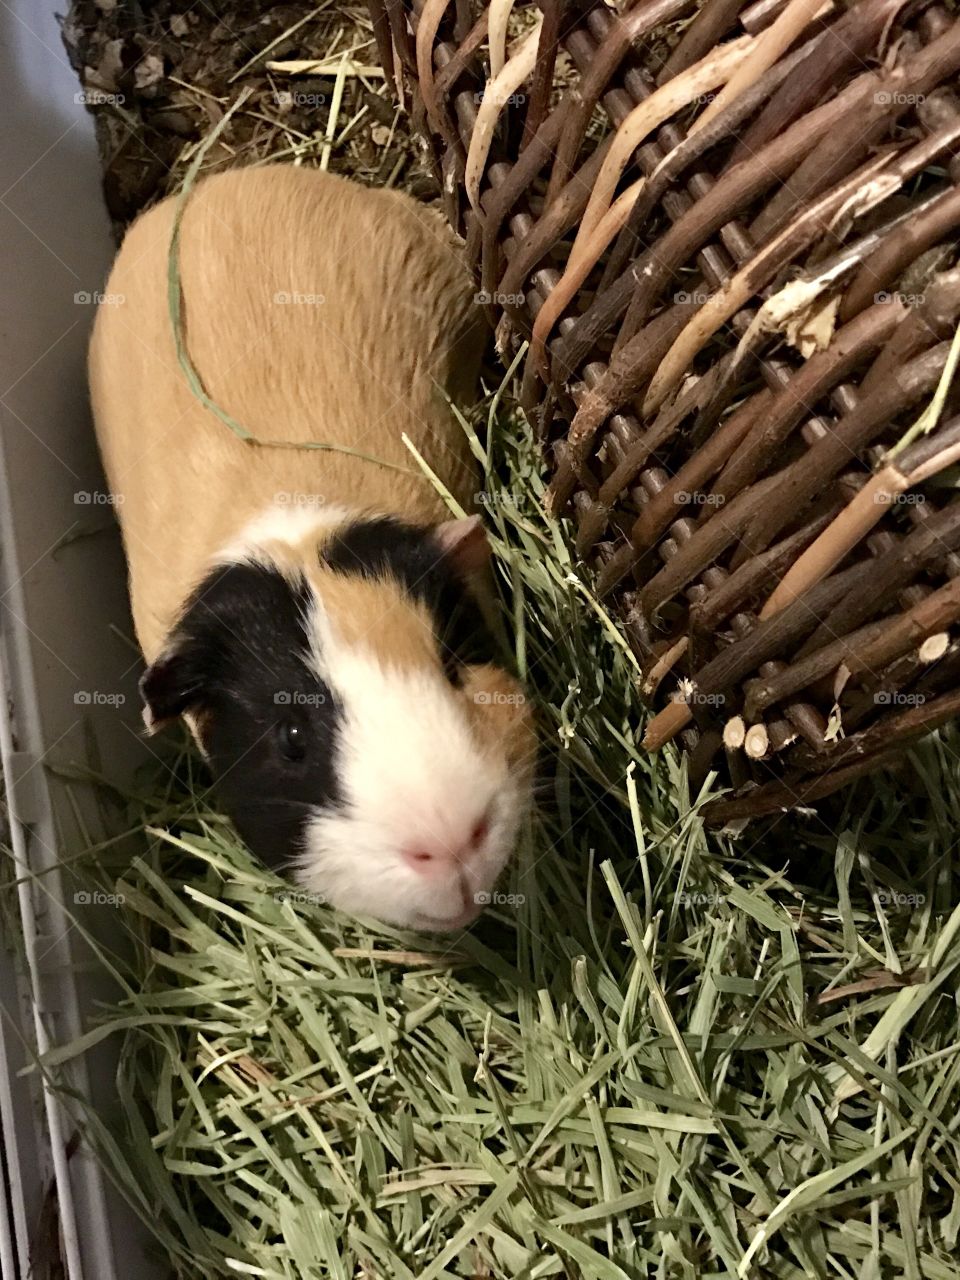 A guinea pig sniffing around in a pile of hay and toys